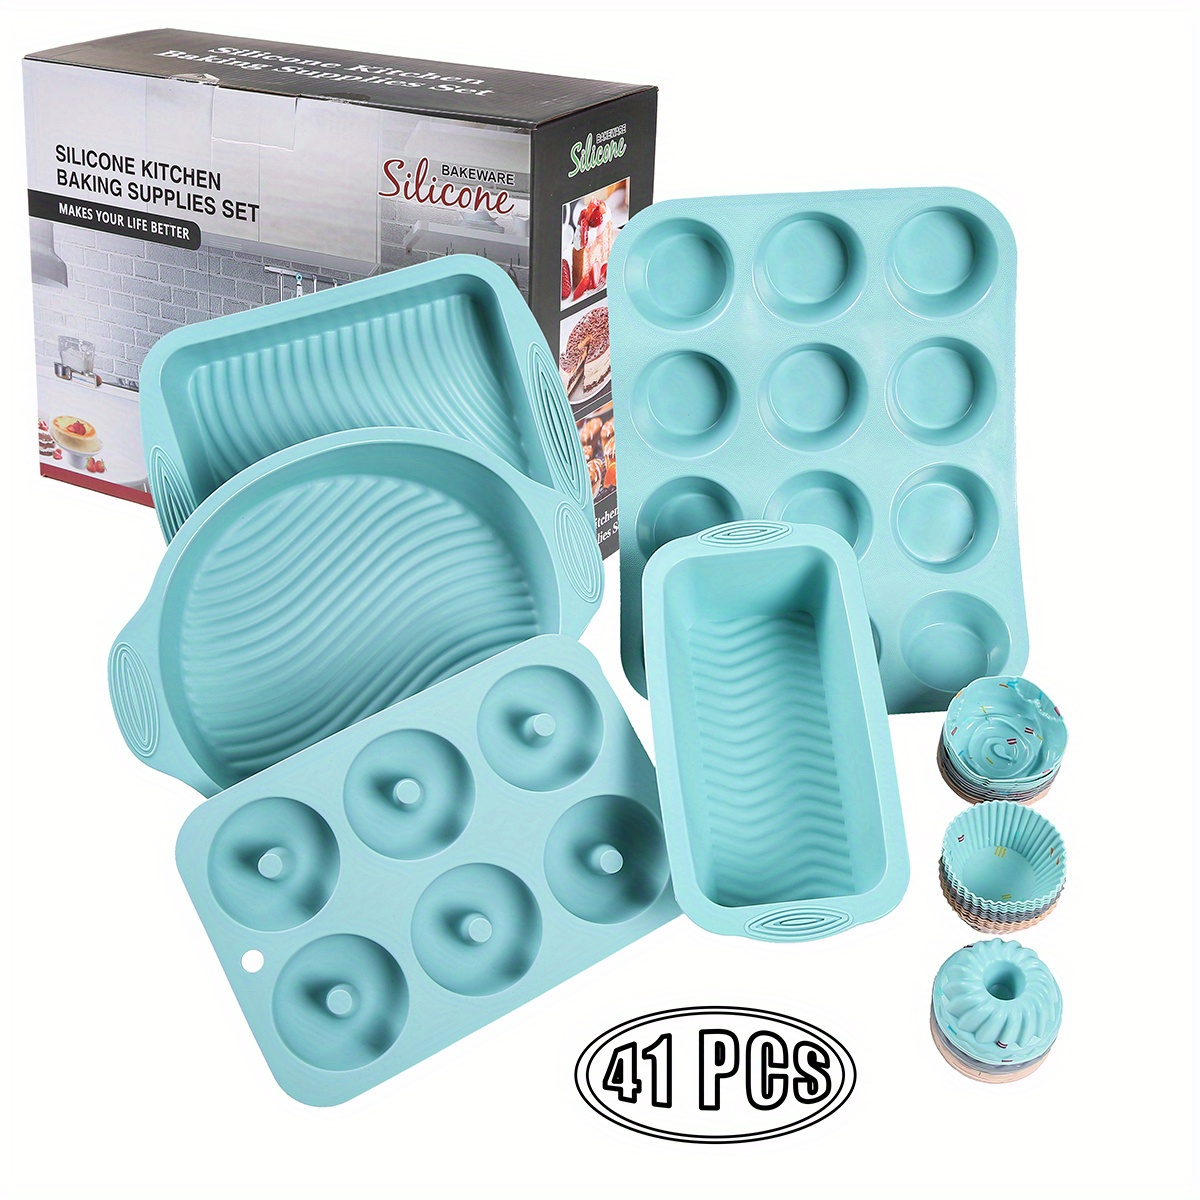 Dyttdg High School School Supplies Silicone Cake Molds Muffin Chocolate Cookie Baking Moulds Pan Popsicle Mold, Blue